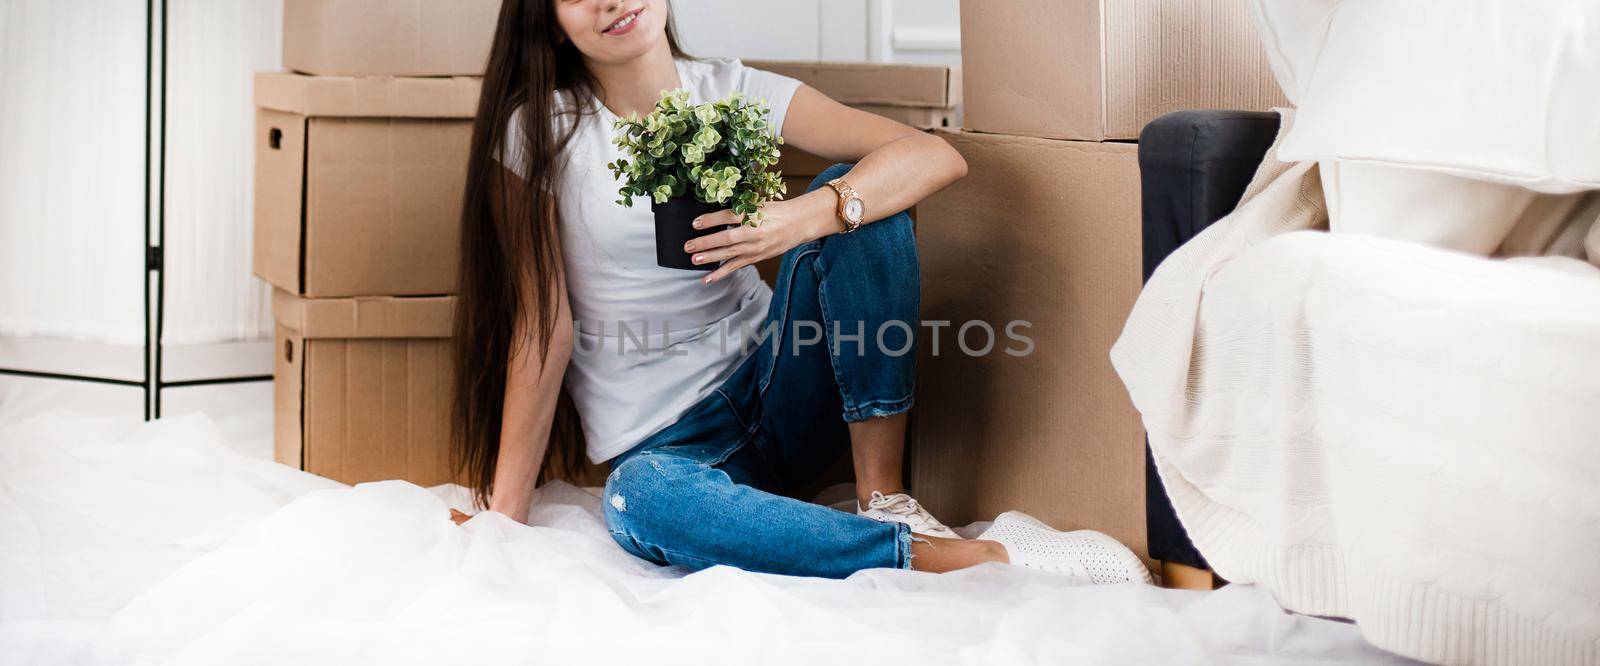 young woman with a home plant sitting on the floor in the new l by SmartPhotoLab